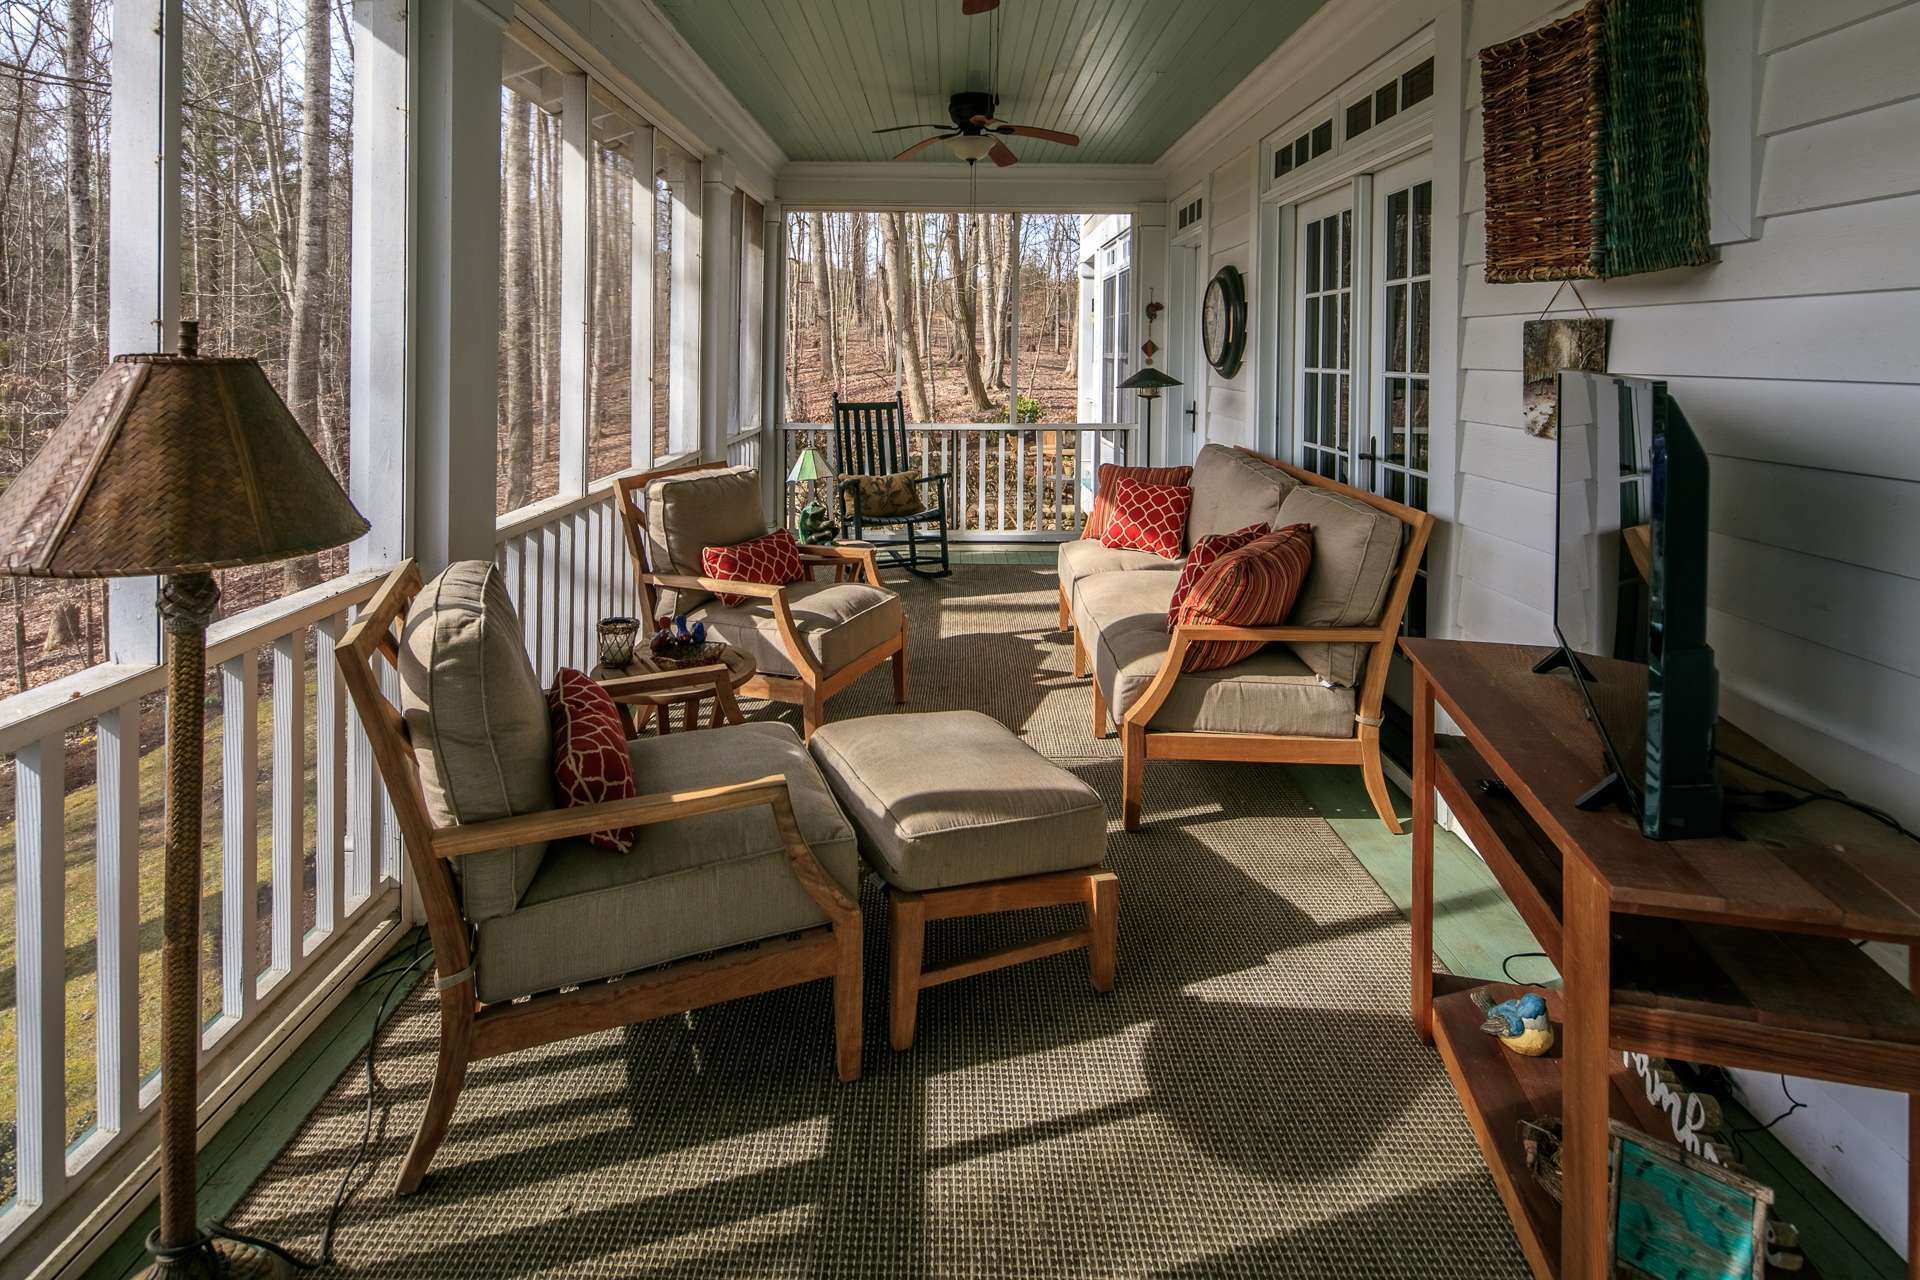 This home offers multiple outdoor living spaces including this covered and screened back porch expanding the living space during warmer months.